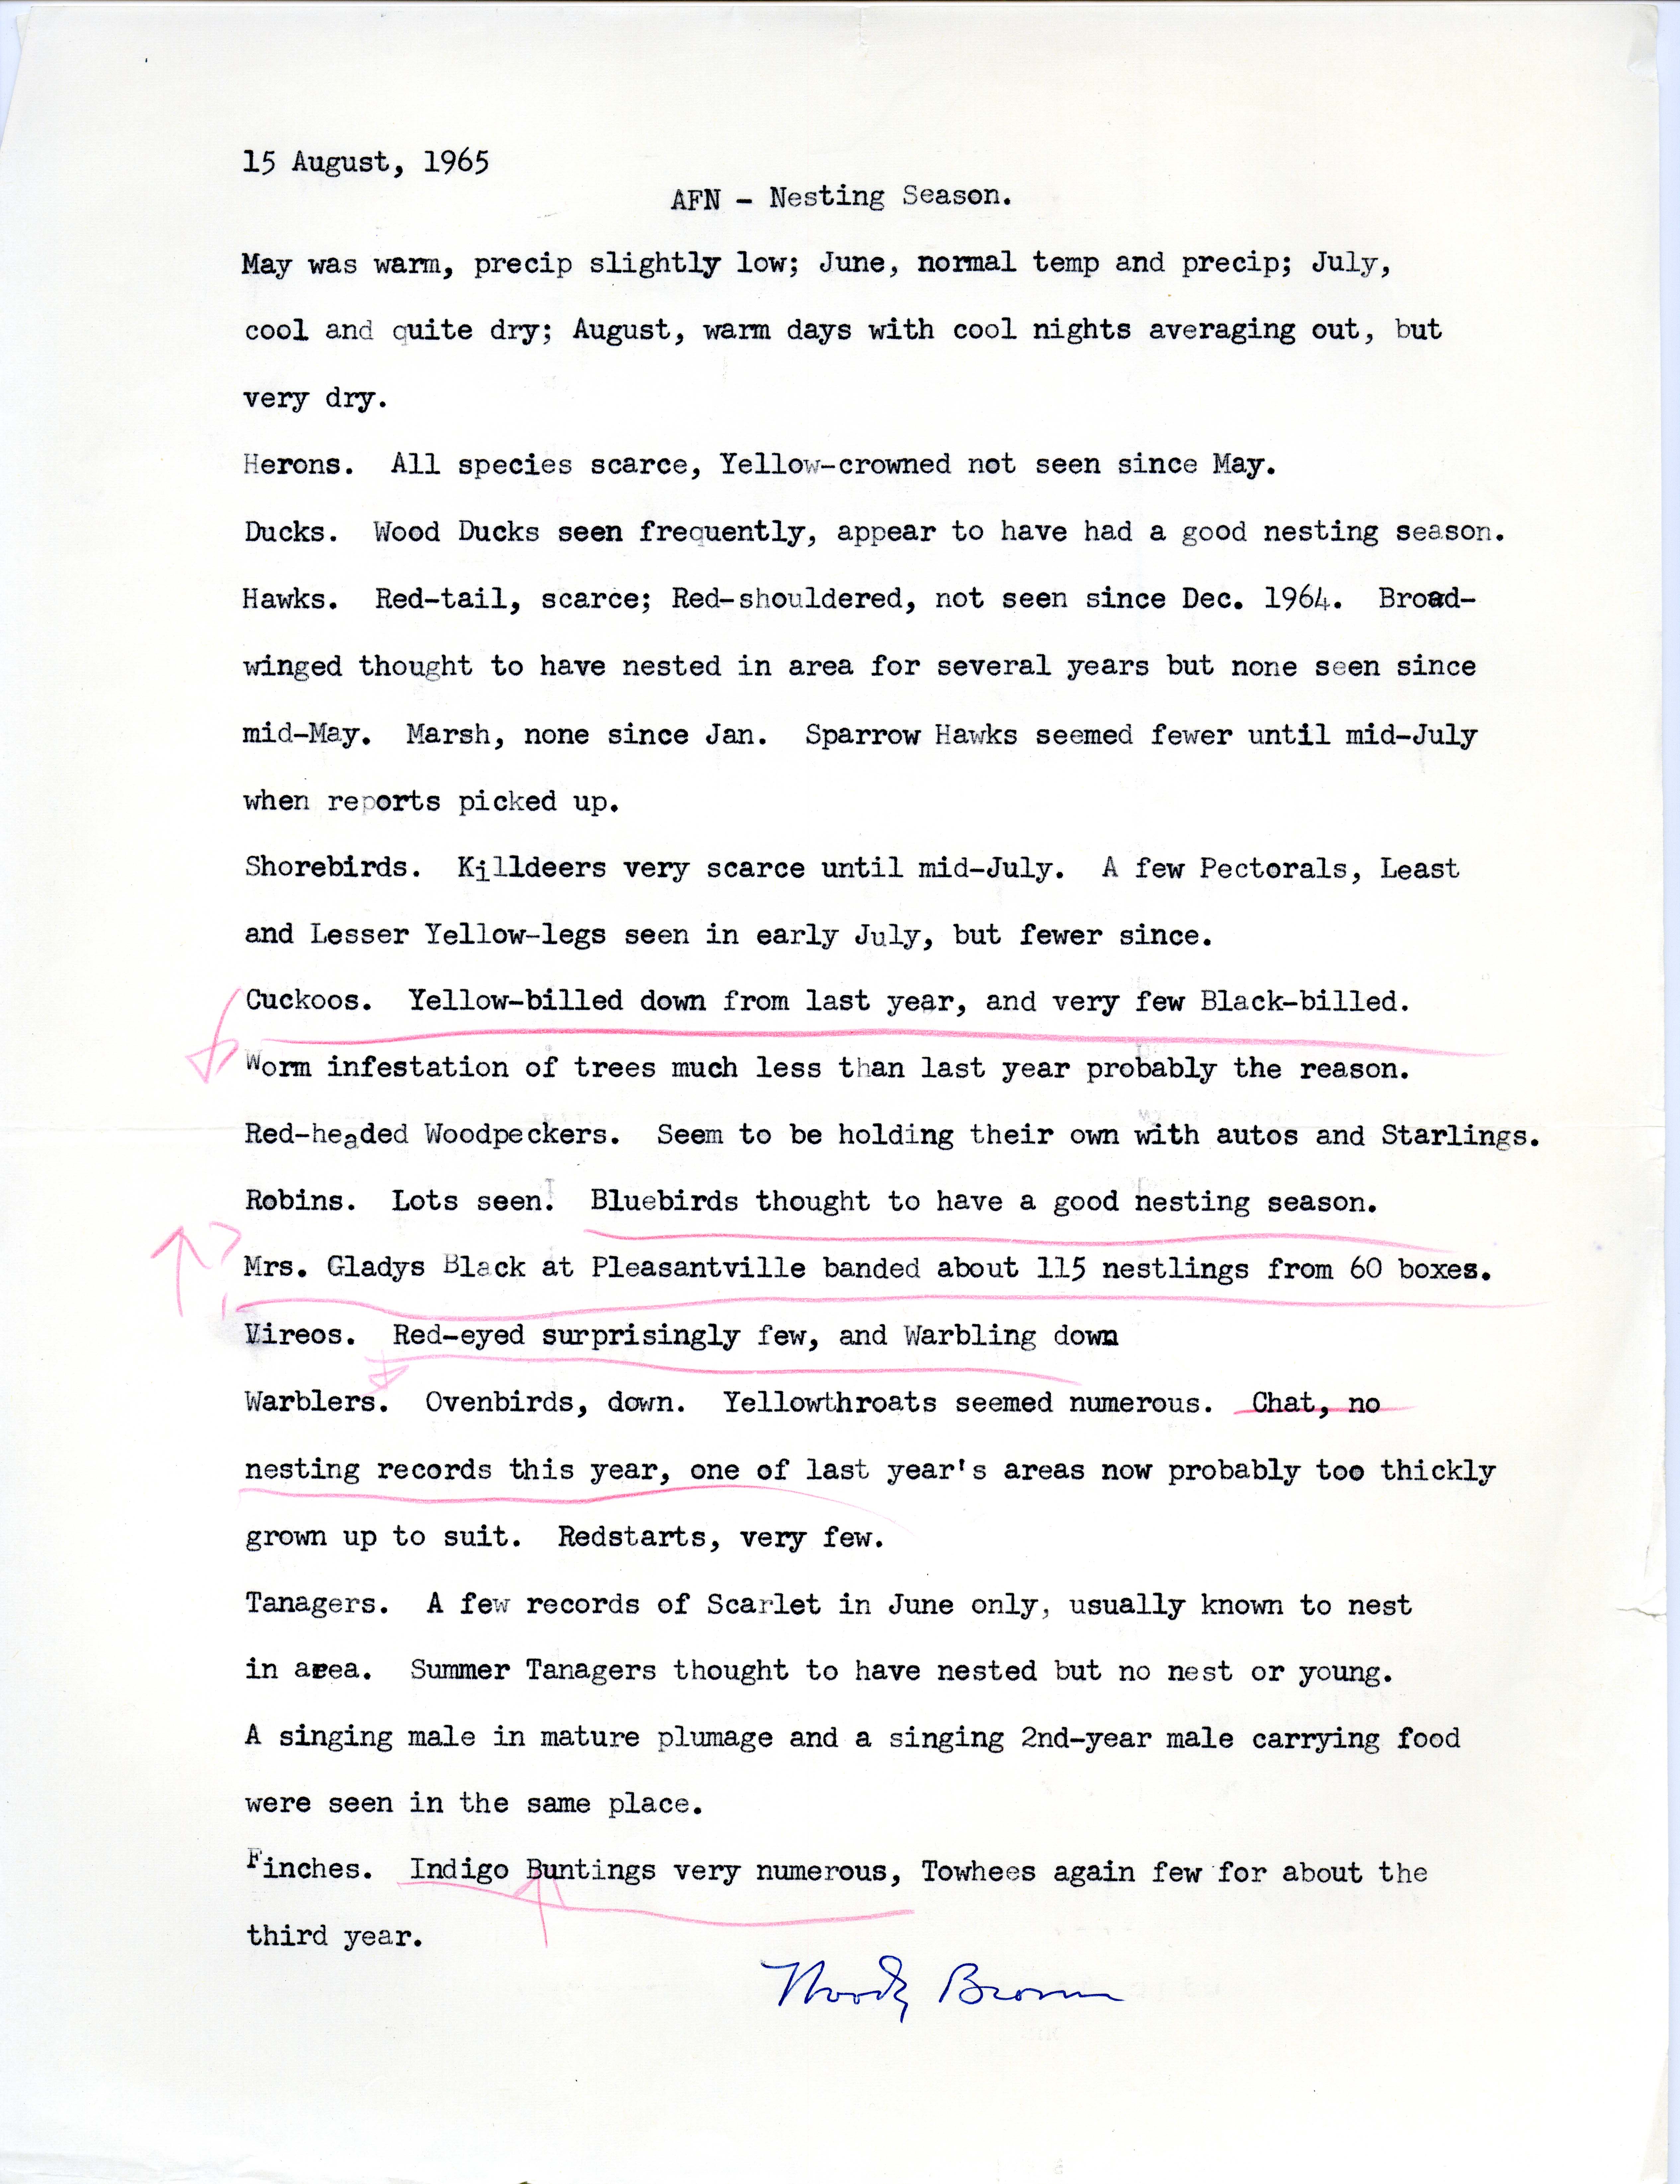 Audubon field notes on the nesting season contributed by Woodward H. Brown, August 15, 1965